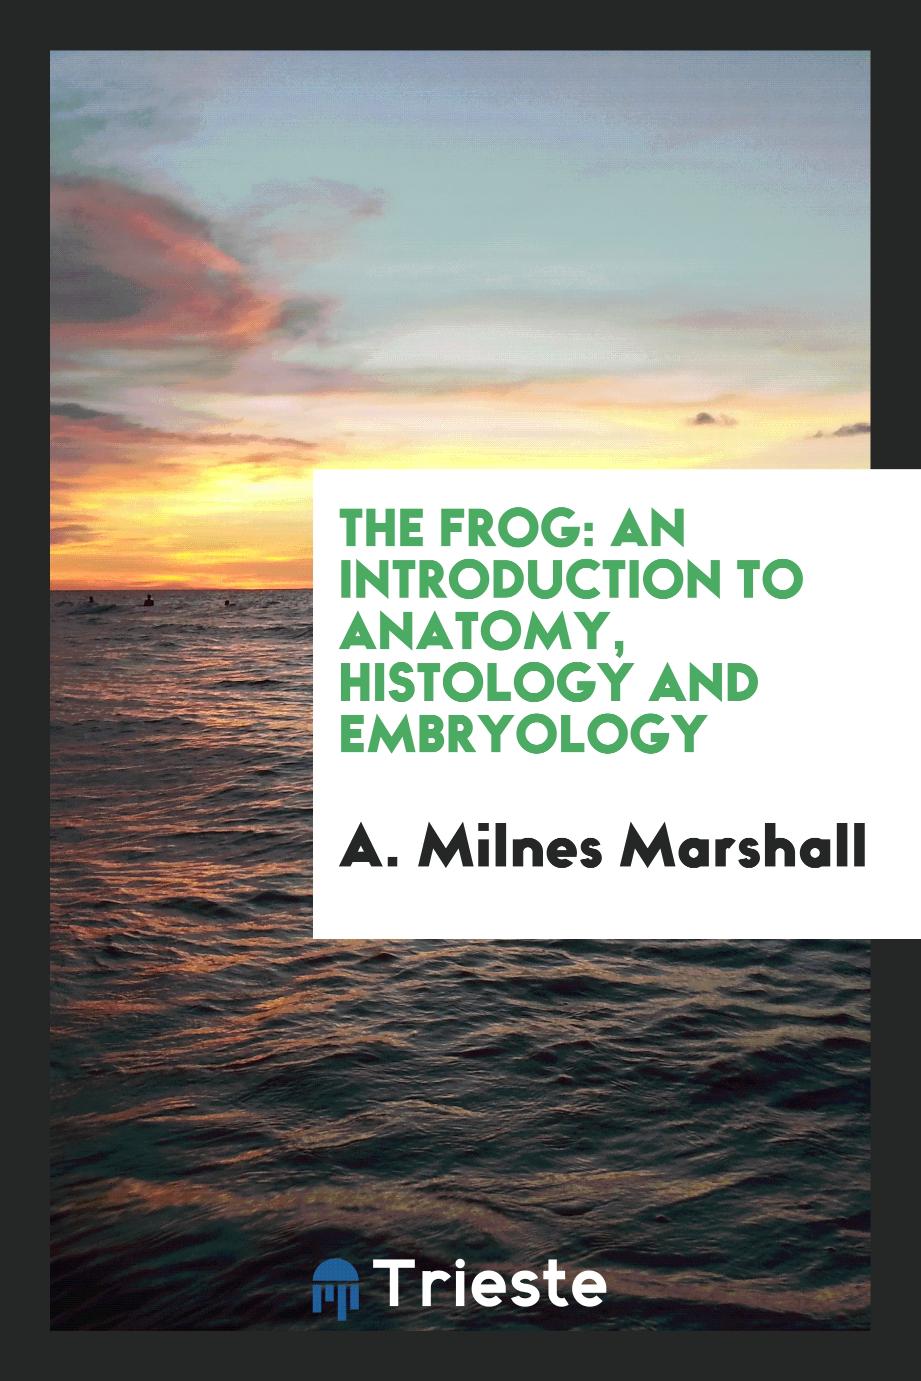 The frog: an introduction to anatomy, histology and embryology